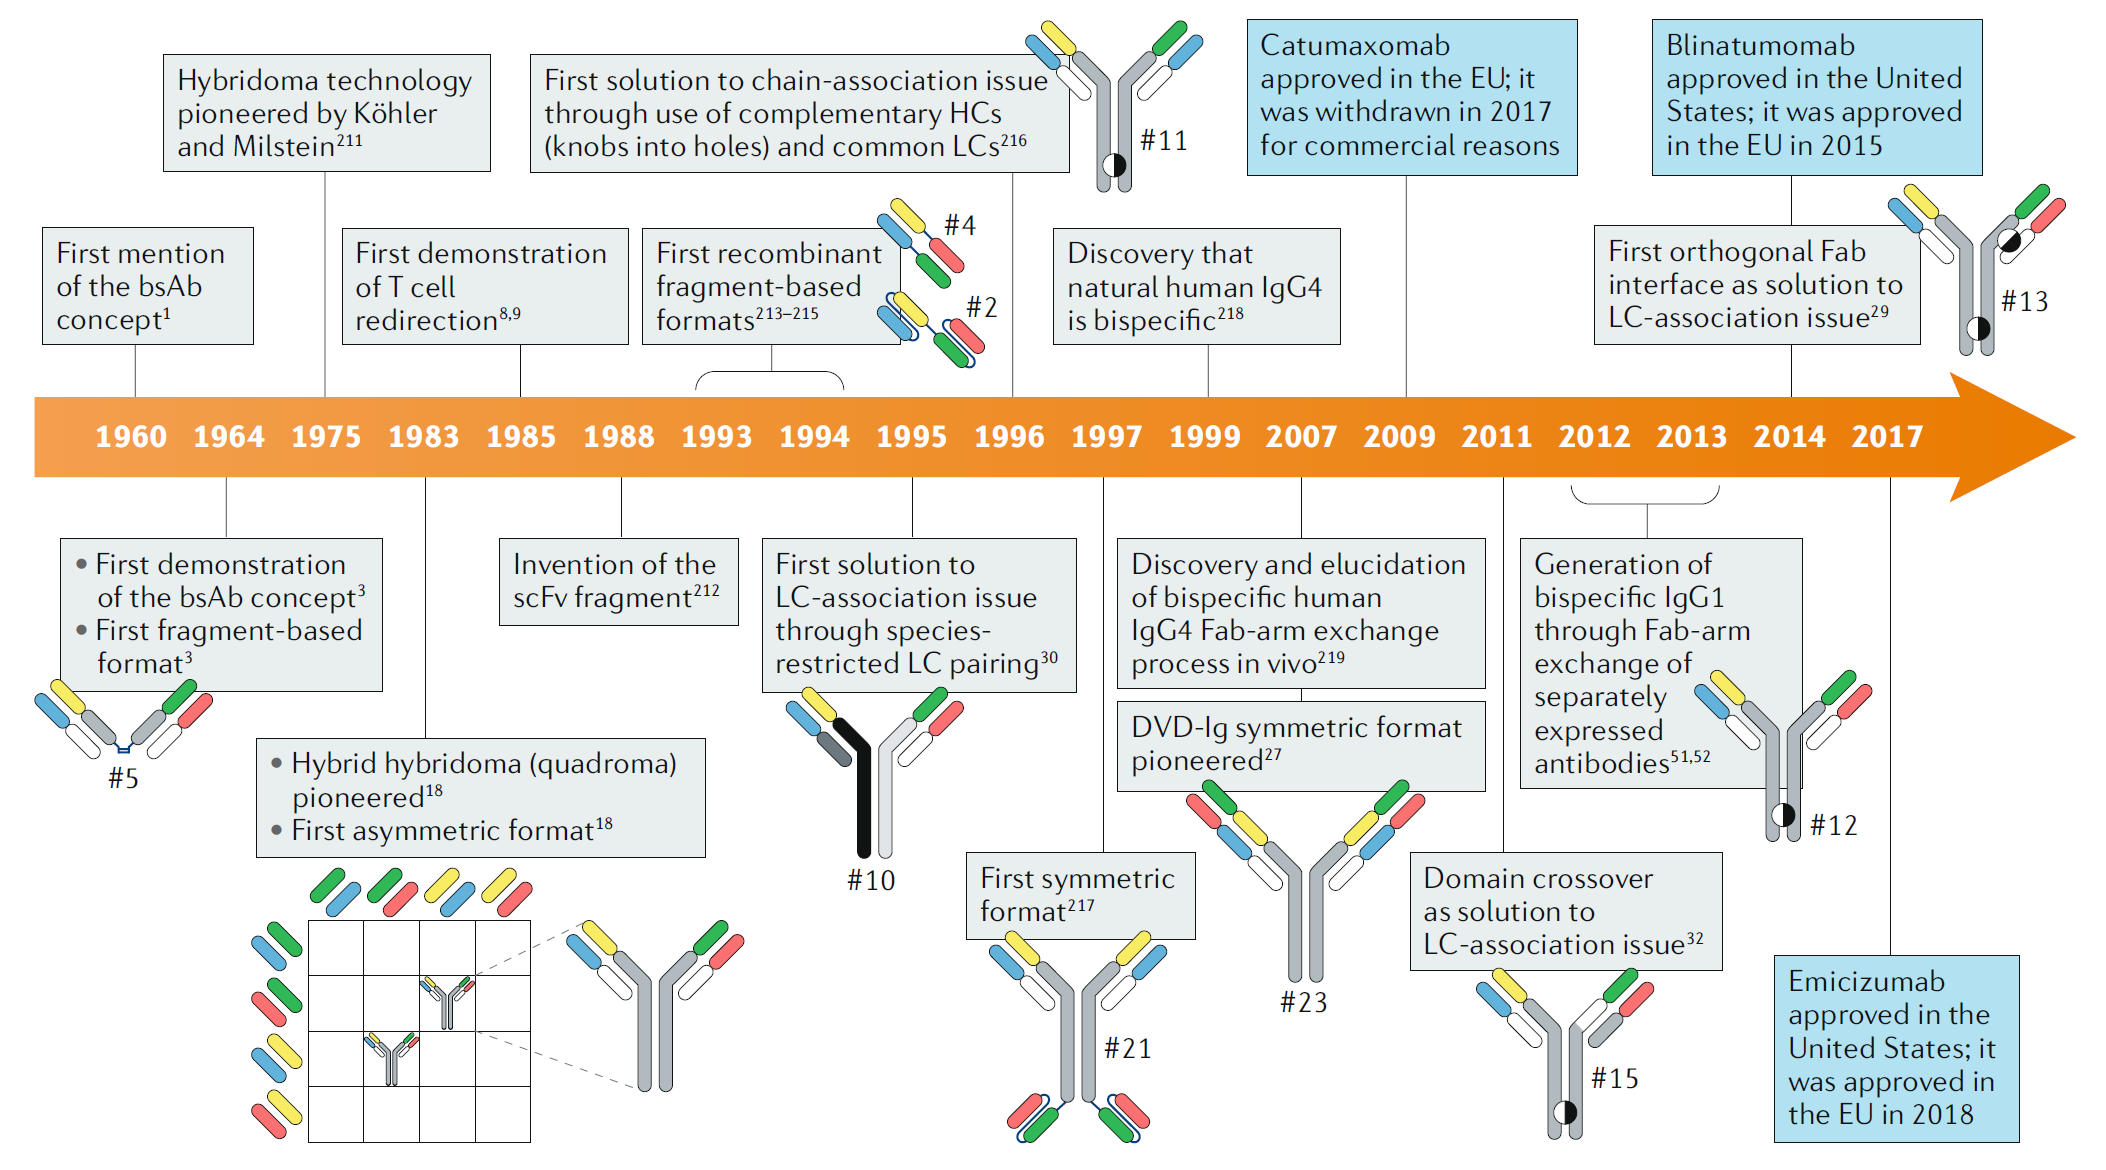 Fig. 1 Timeline of conceptual and technical innovations contributing to the development of the therapeutic bsAb landscape. (Labrijn, 2019)